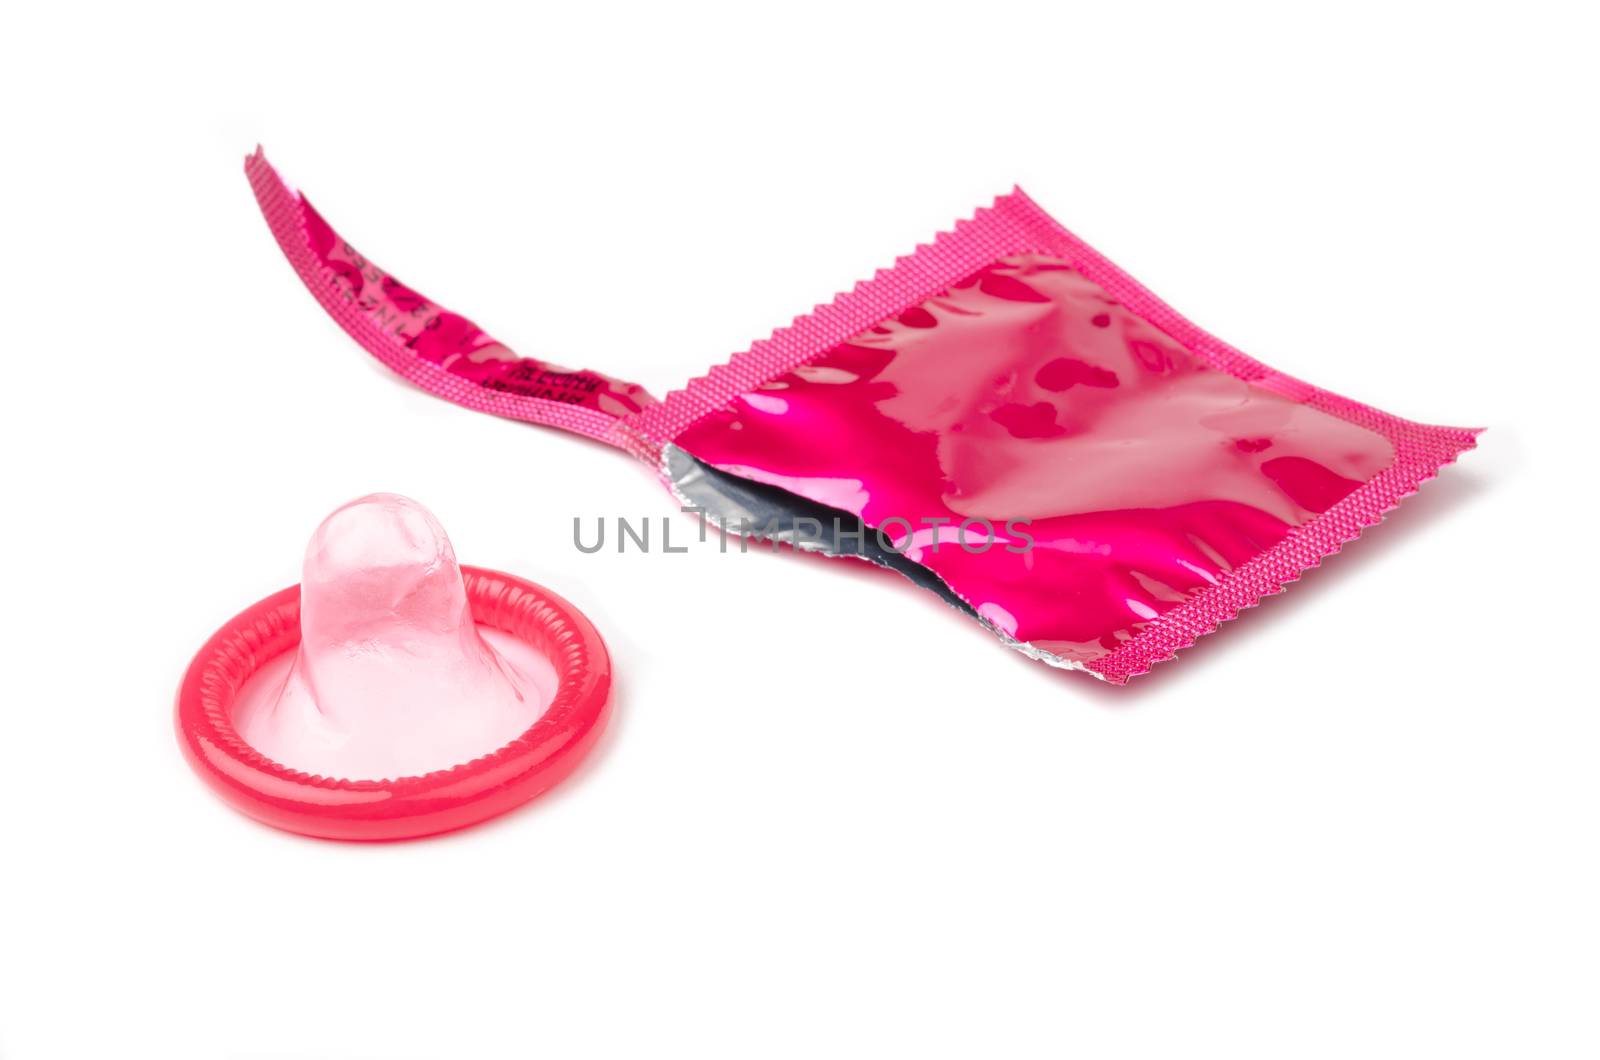 Condom packaging on white background.